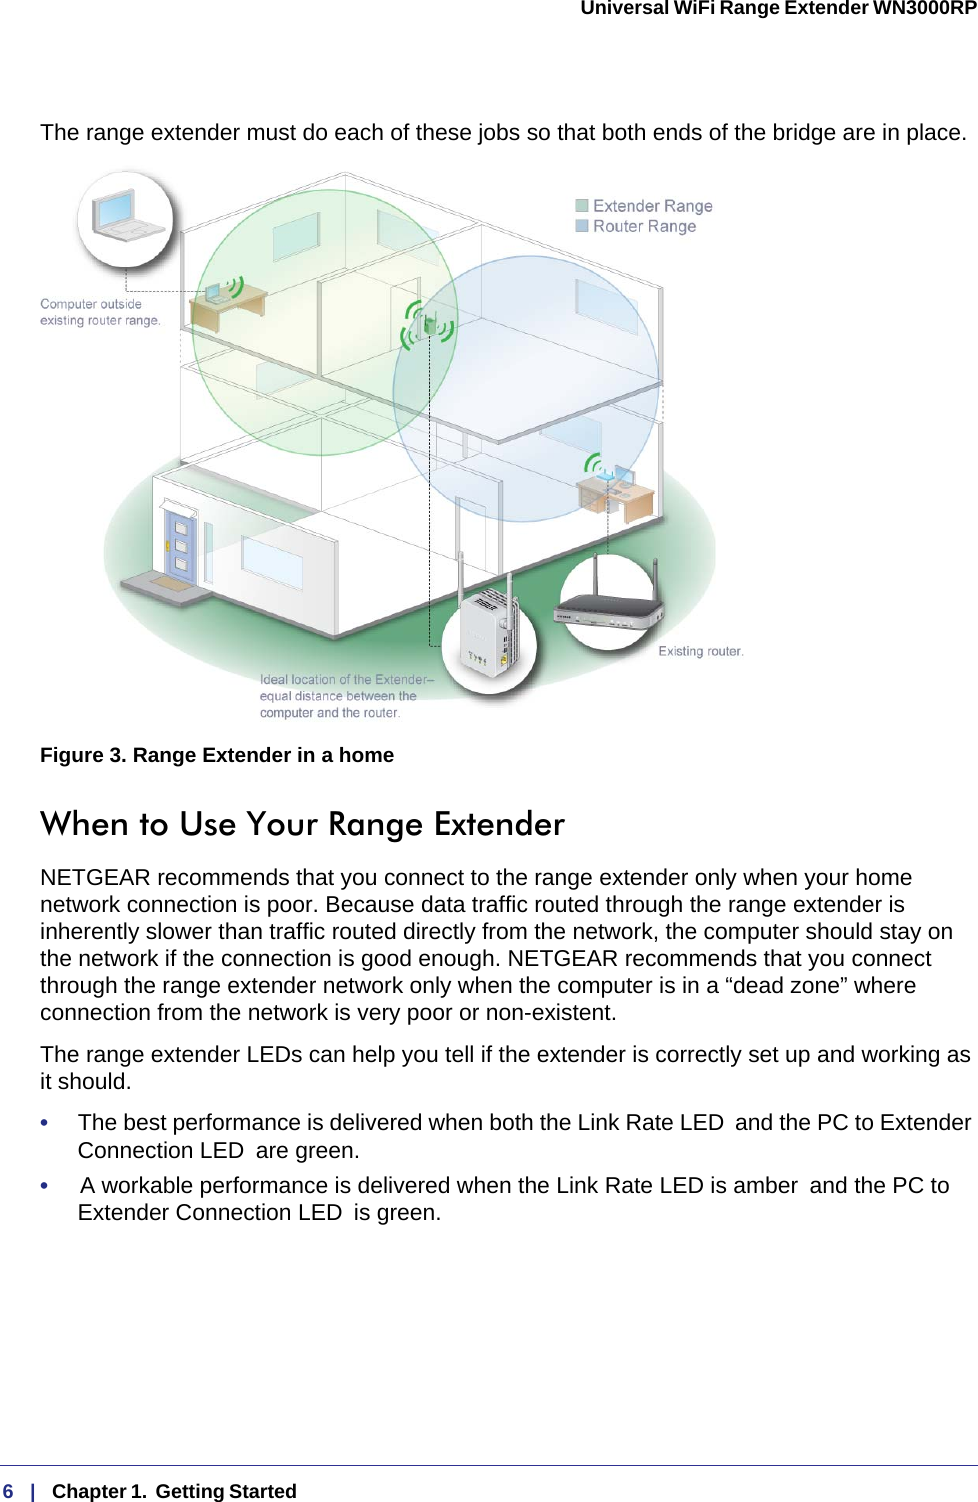 6   |   Chapter 1.  Getting Started  Universal WiFi Range Extender WN3000RP The range extender must do each of these jobs so that both ends of the bridge are in place.Figure 3. Range Extender in a homeWhen to Use Your Range ExtenderNETGEAR recommends that you connect to the range extender only when your home network connection is poor. Because data traffic routed through the range extender is inherently slower than traffic routed directly from the network, the computer should stay on the network if the connection is good enough. NETGEAR recommends that you connect through the range extender network only when the computer is in a “dead zone” where connection from the network is very poor or non-existent.The range extender LEDs can help you tell if the extender is correctly set up and working as it should.•     The best performance is delivered when both the Link Rate LED  and the PC to Extender Connection LED  are green.•     A workable performance is delivered when the Link Rate LED is amber  and the PC to Extender Connection LED  is green.